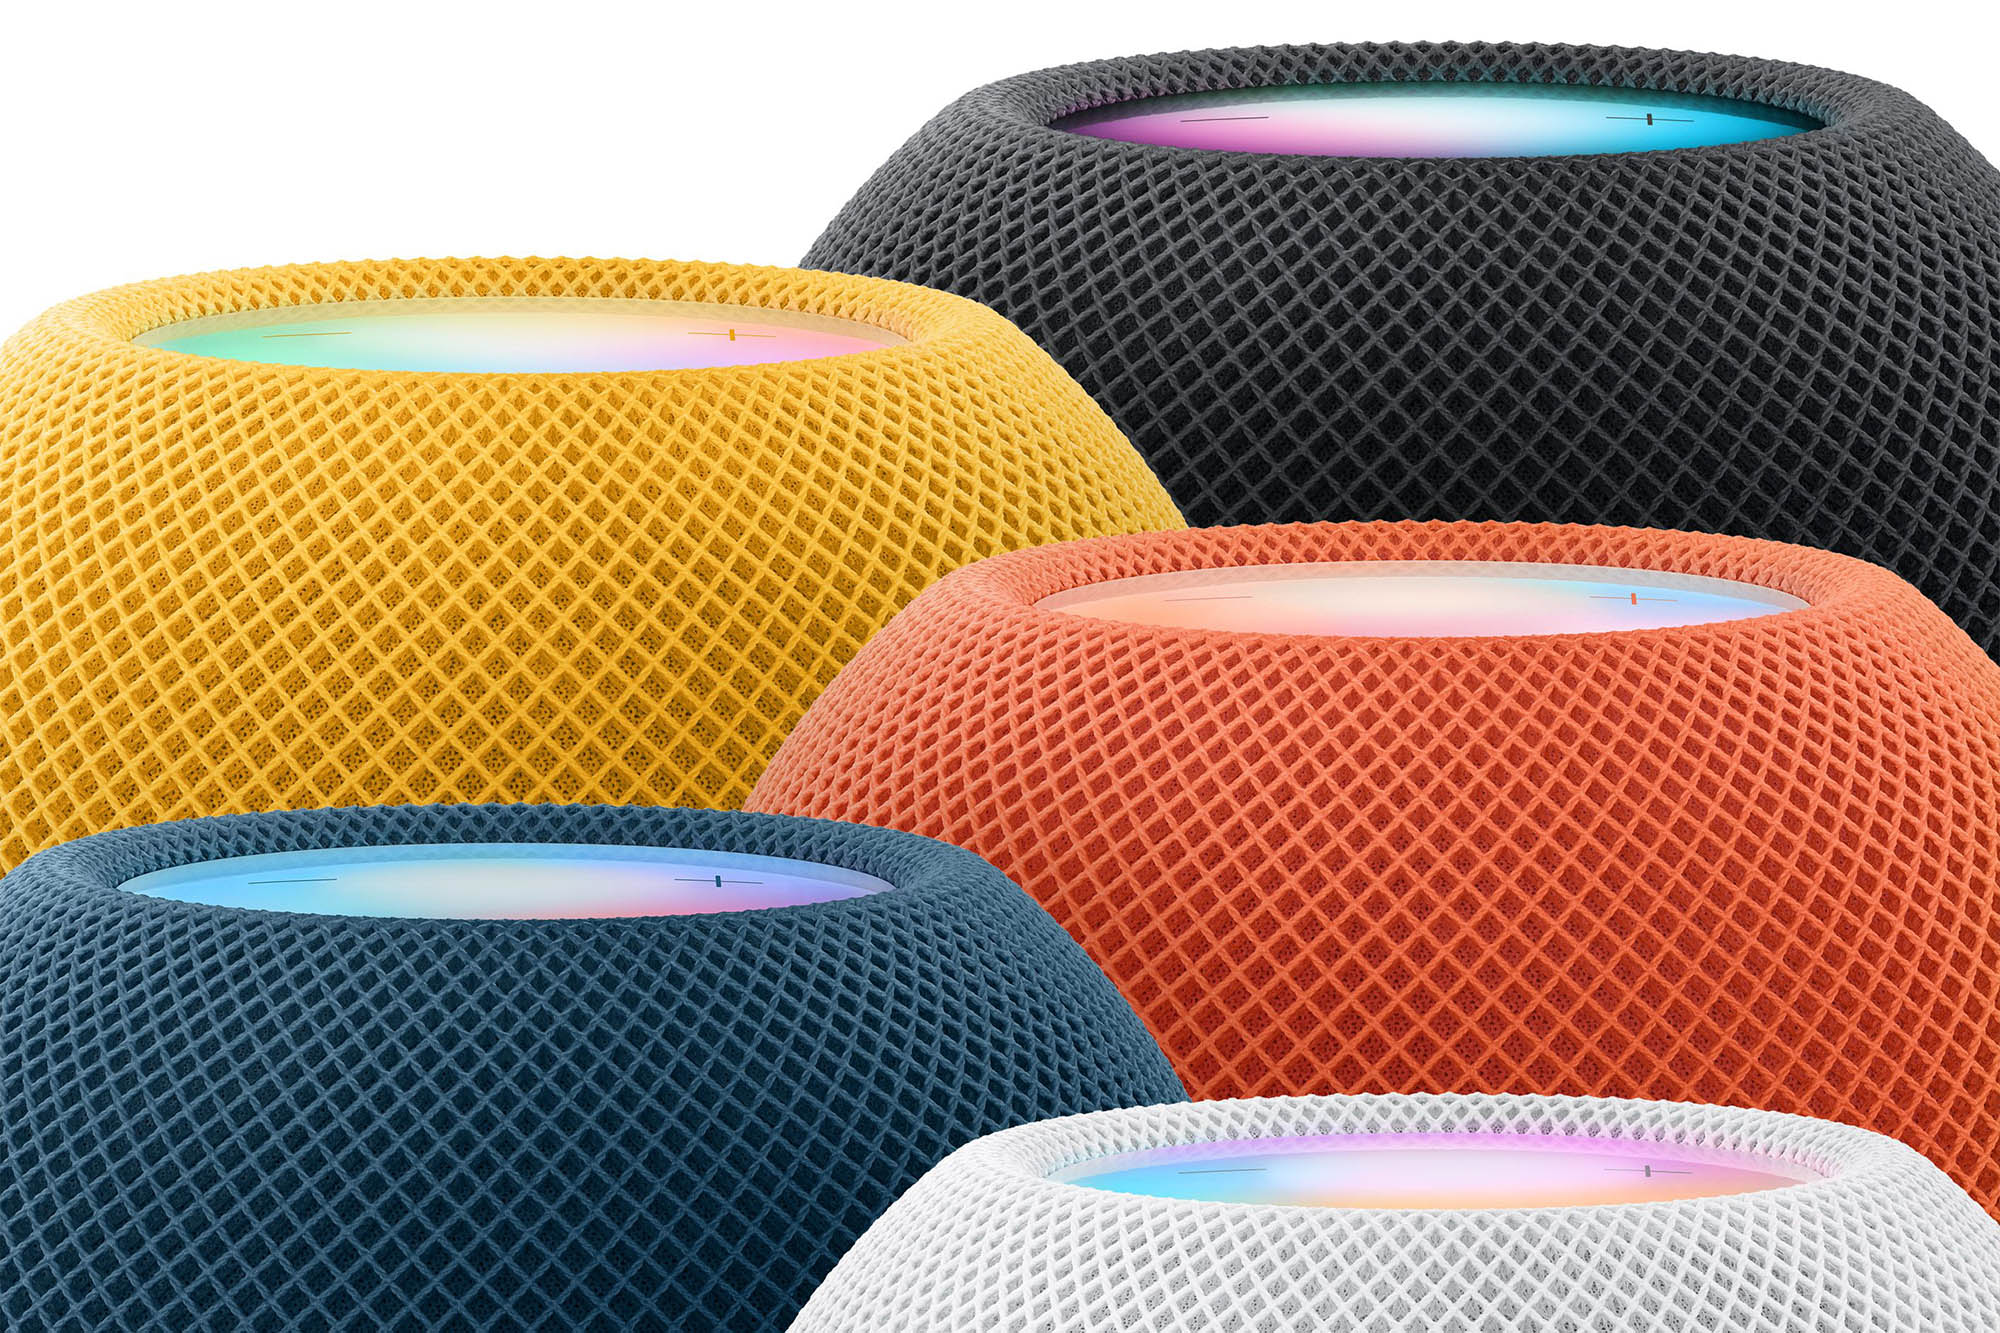 Things You Never Knew Your Apple HomePod Mini Could Do